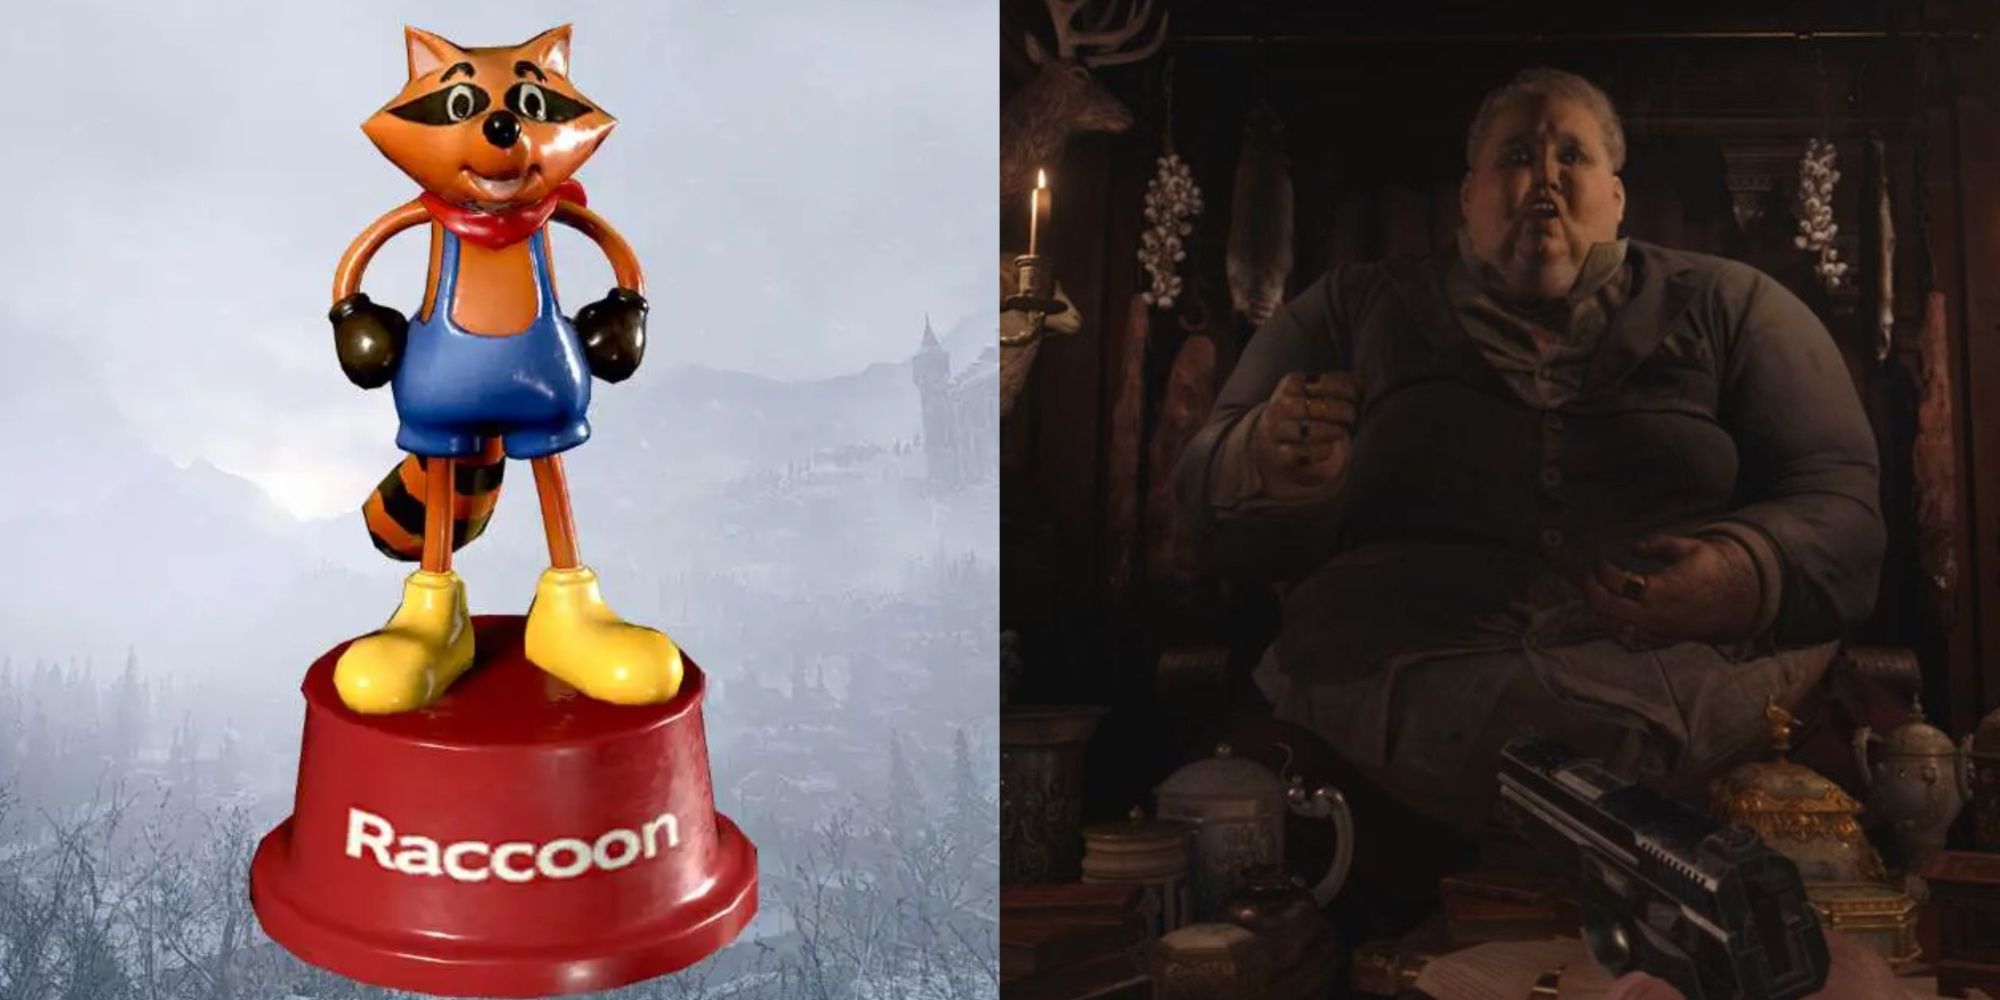 A collage showing the Raccoon weapon charm on the left and the Duke in his store on the right.